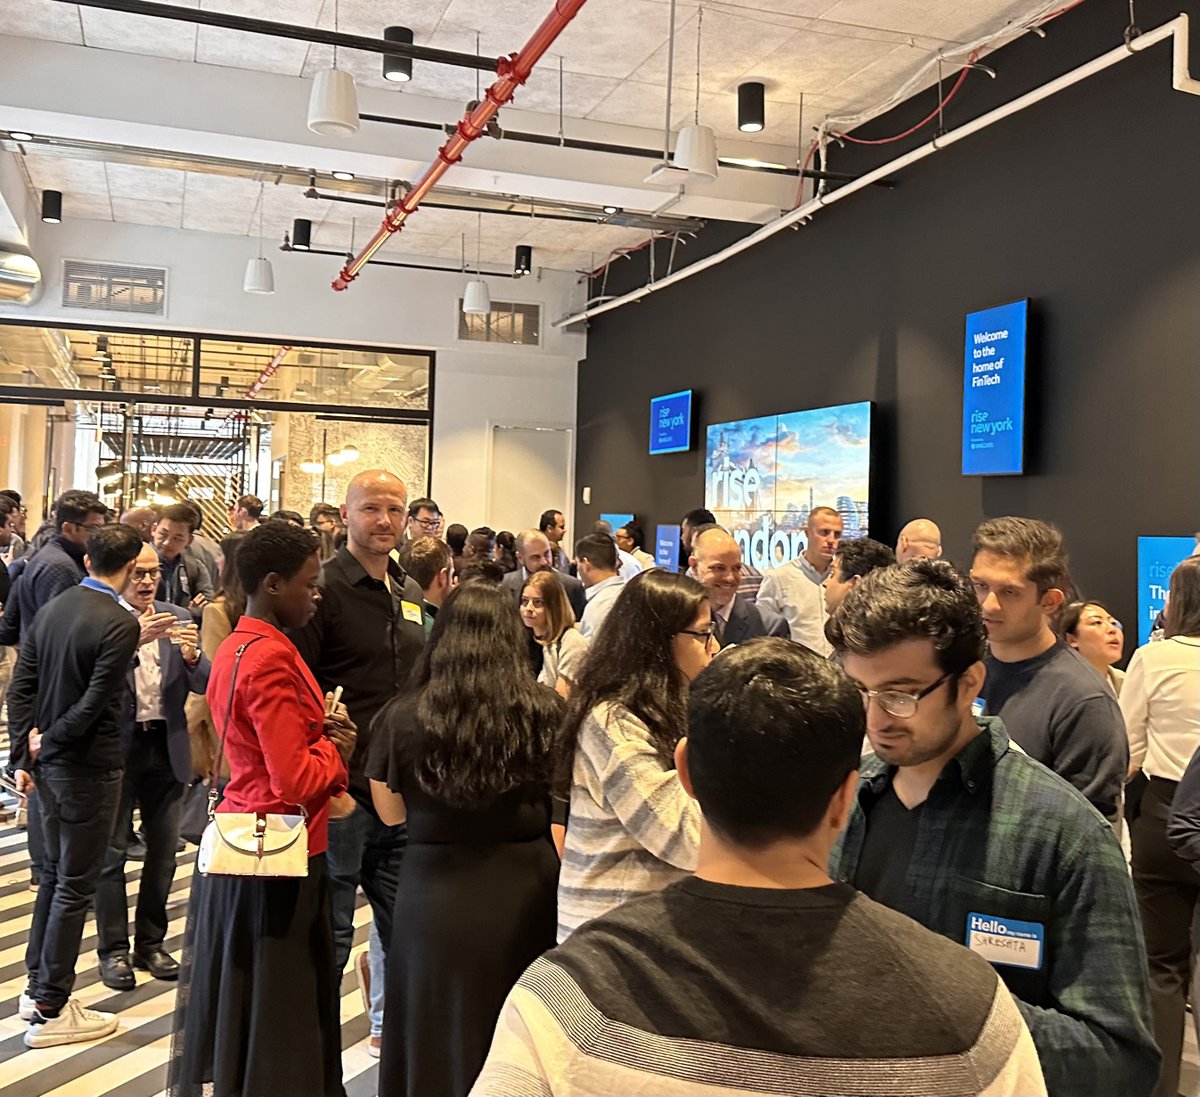 That’s a wrap for #NYFinTechWeek! It's been such an incredible week of innovation, collaboration and inspiration to reflect on. Thank you to everyone who joined us at the #HomeofFinTech.